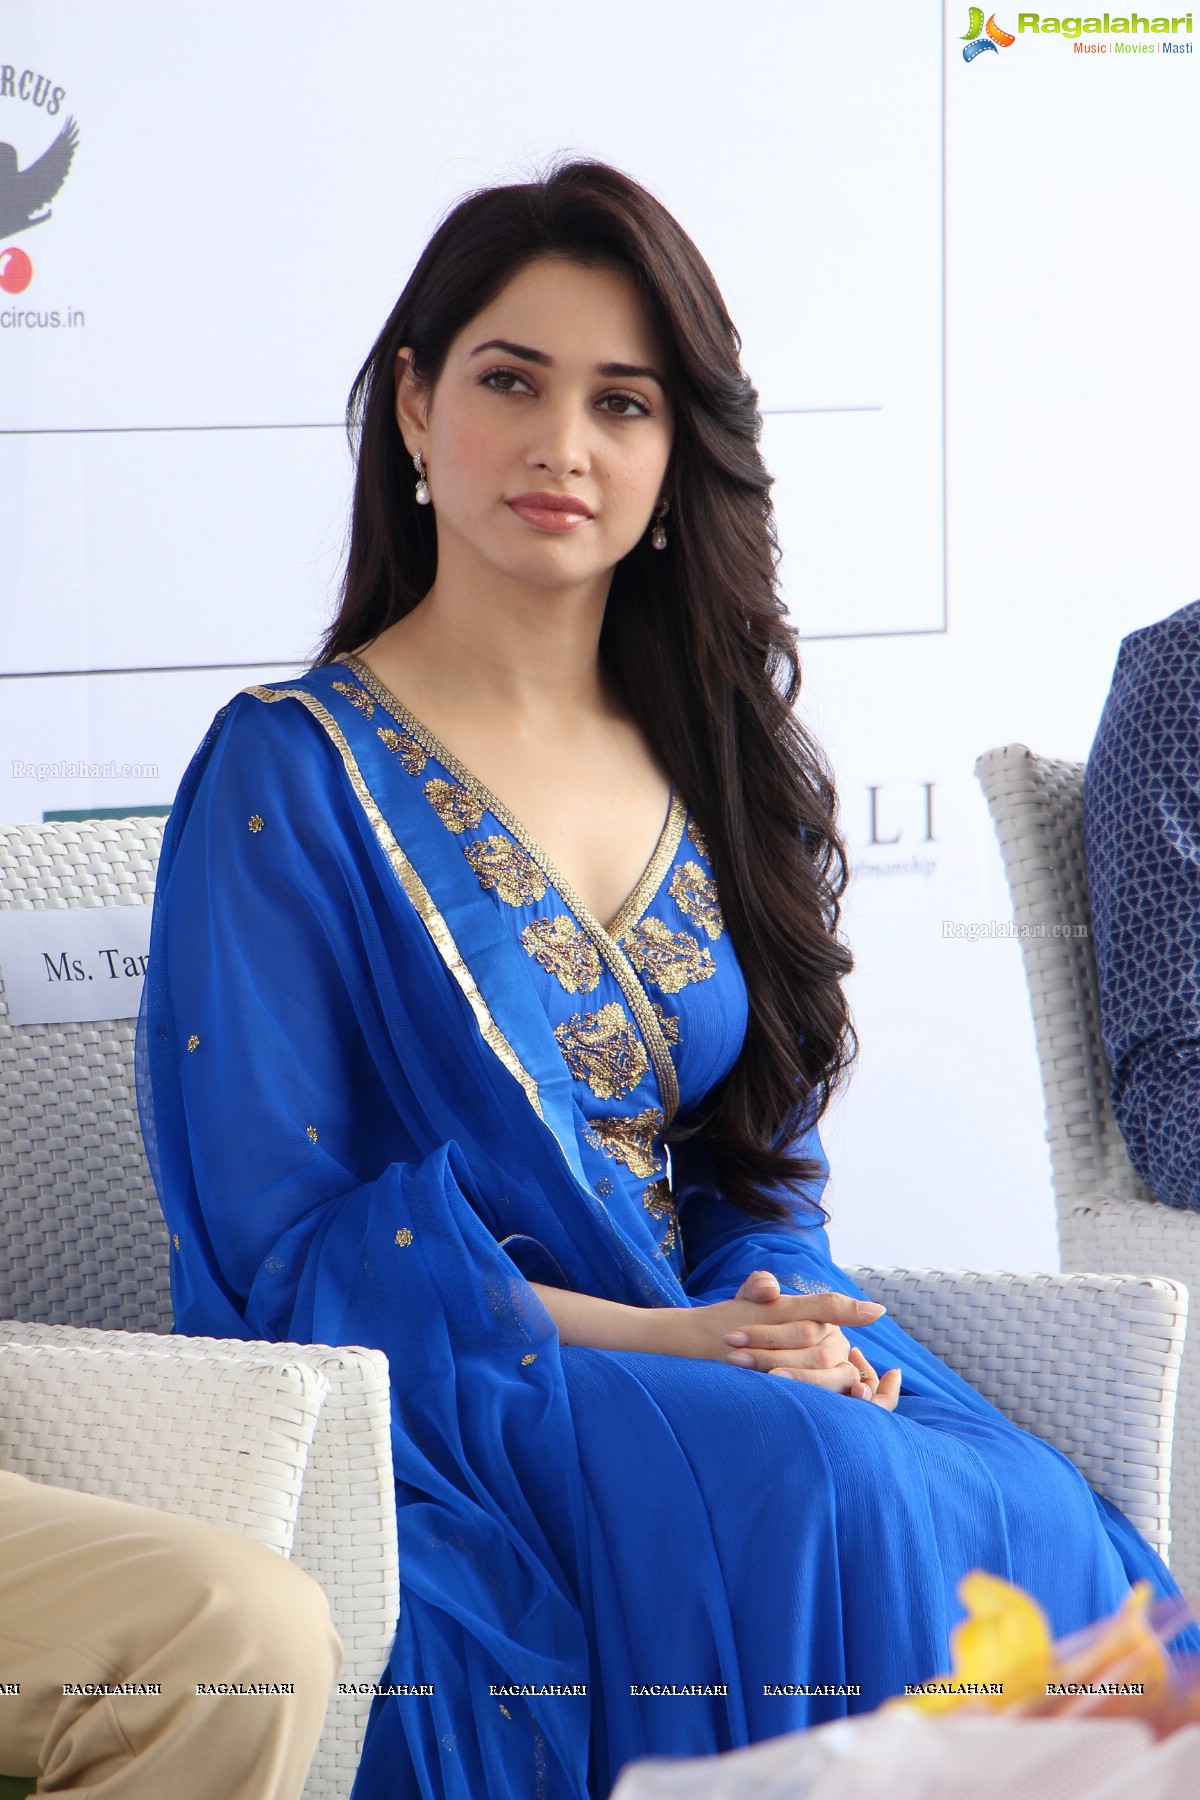 Tamannaah kick-starts Cancer Crusaders Invitation Cup 2016 by Cure Foundation, Hyderabad